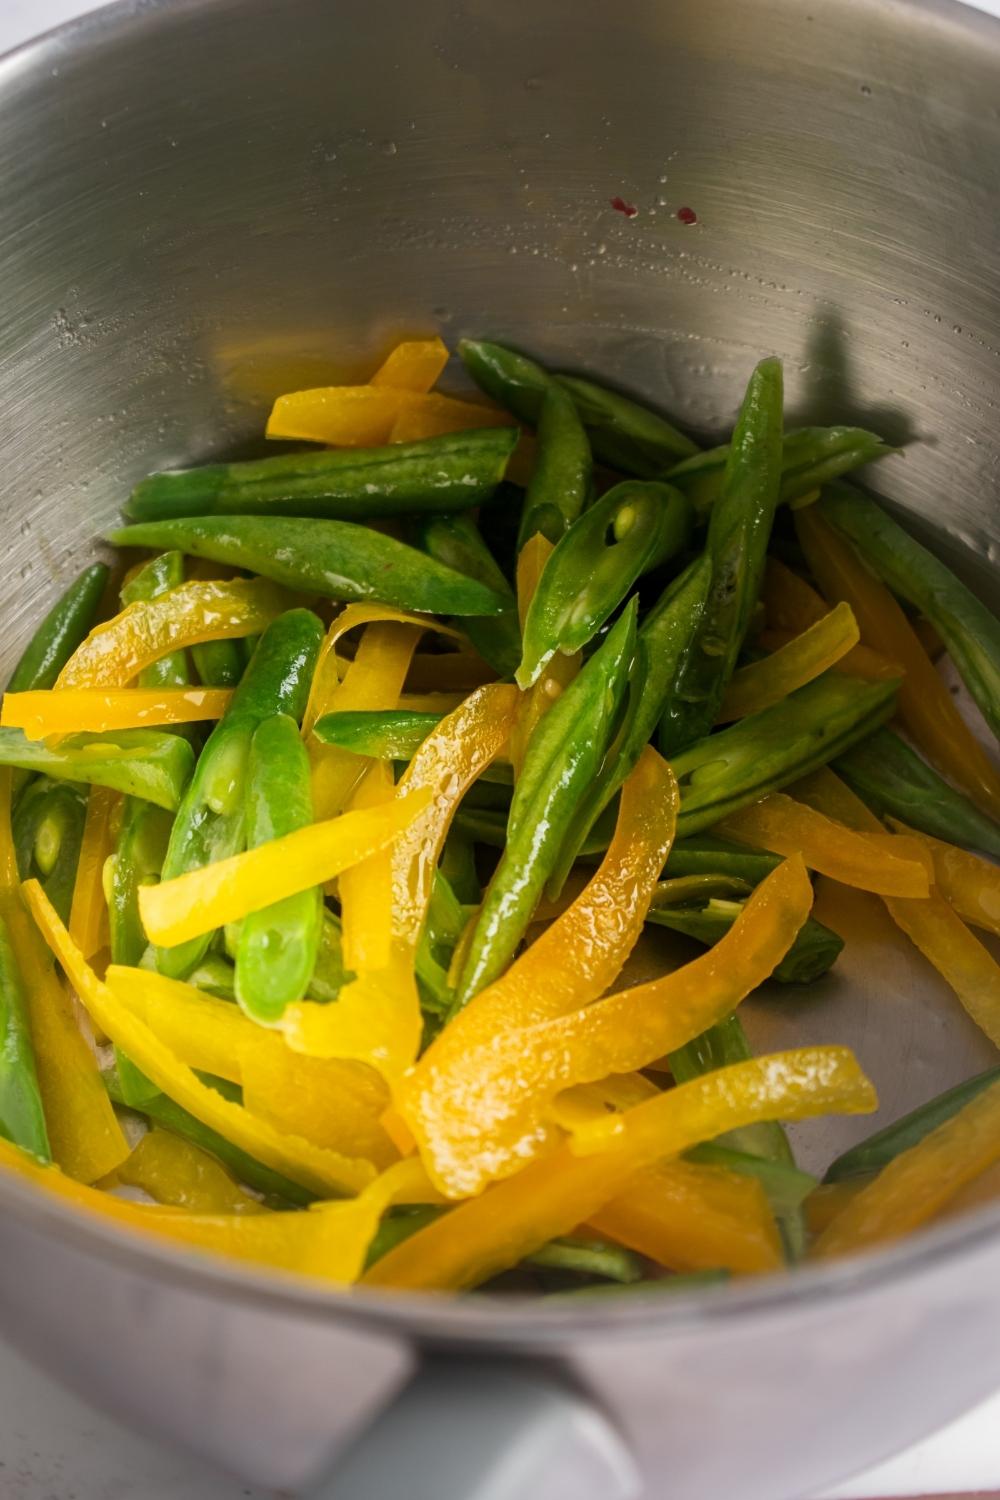 Green beans and sliced yellow red bell peppers in a gray pot.